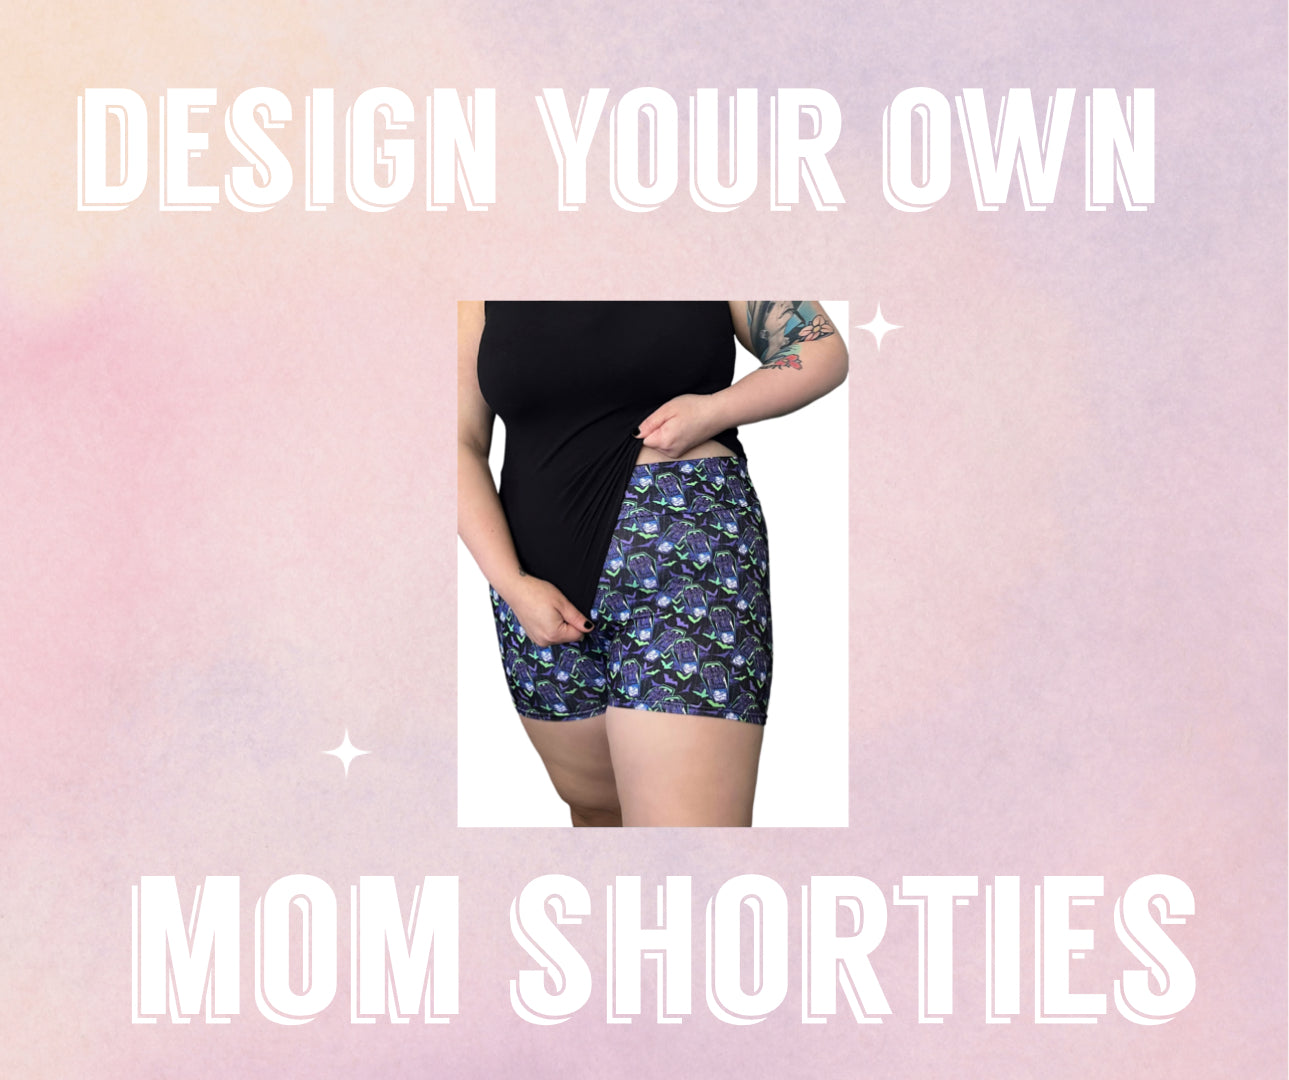 Design your own | Mom shorties